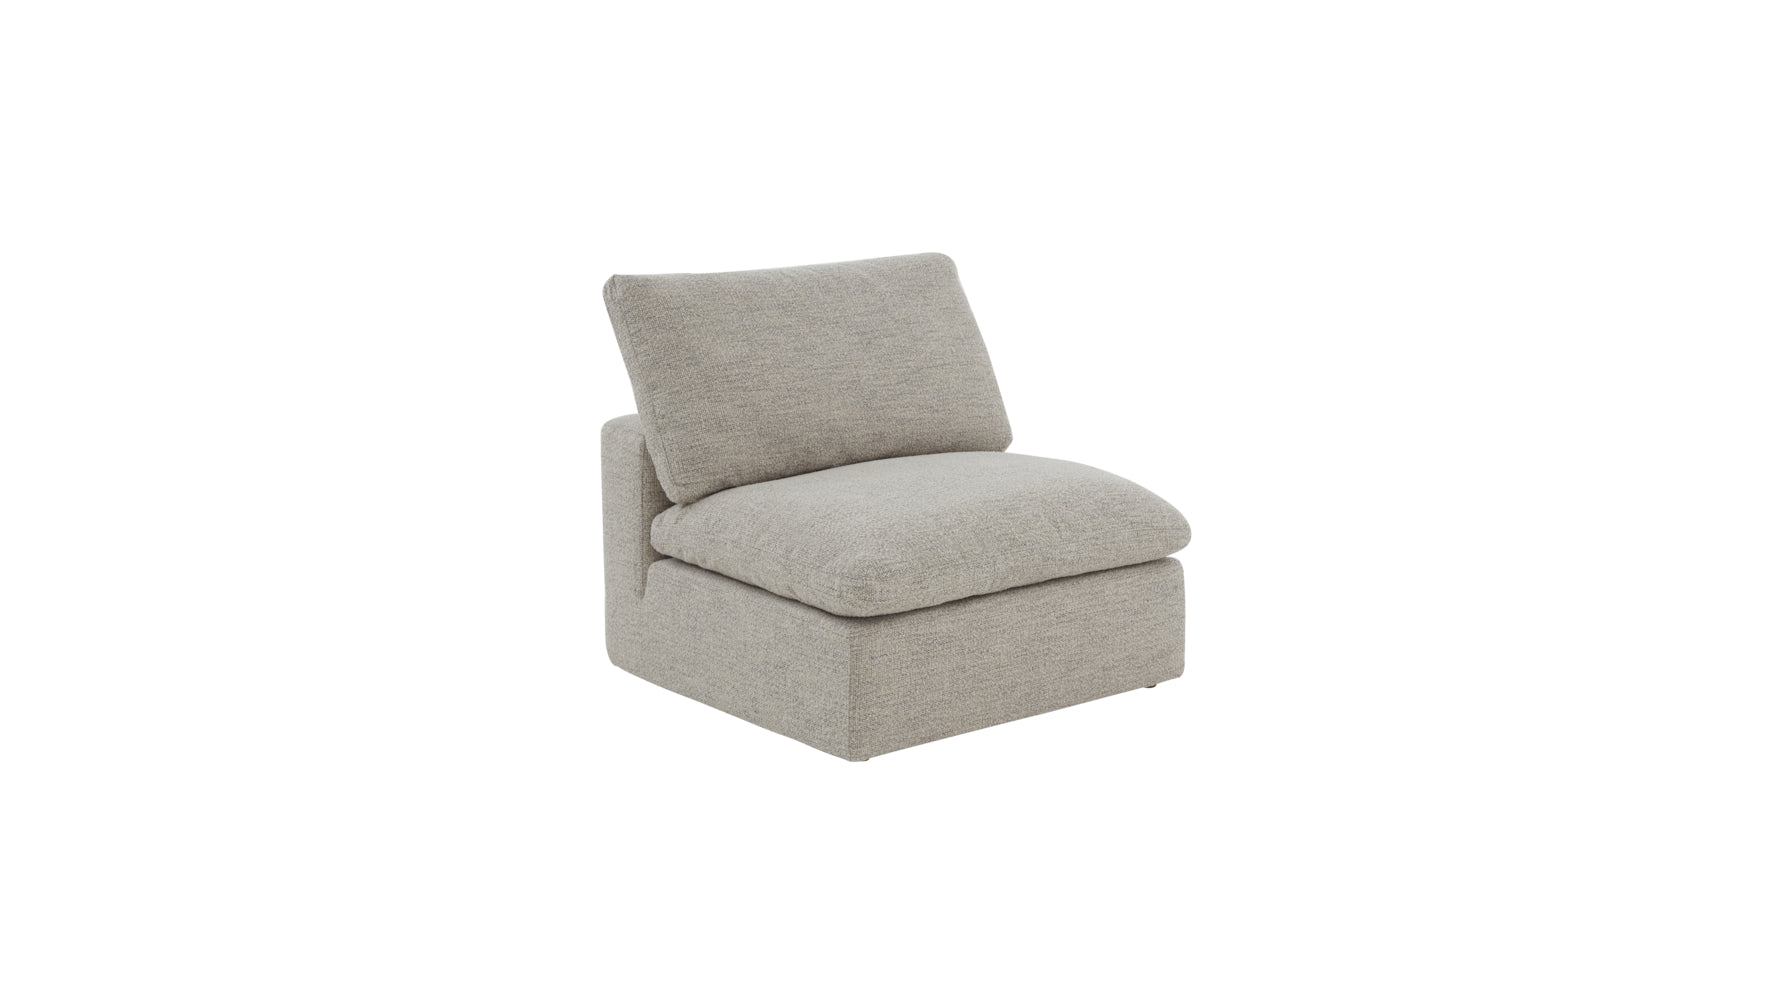 Movie Night™ Armless Chair, Large, Oatmeal - Image 3